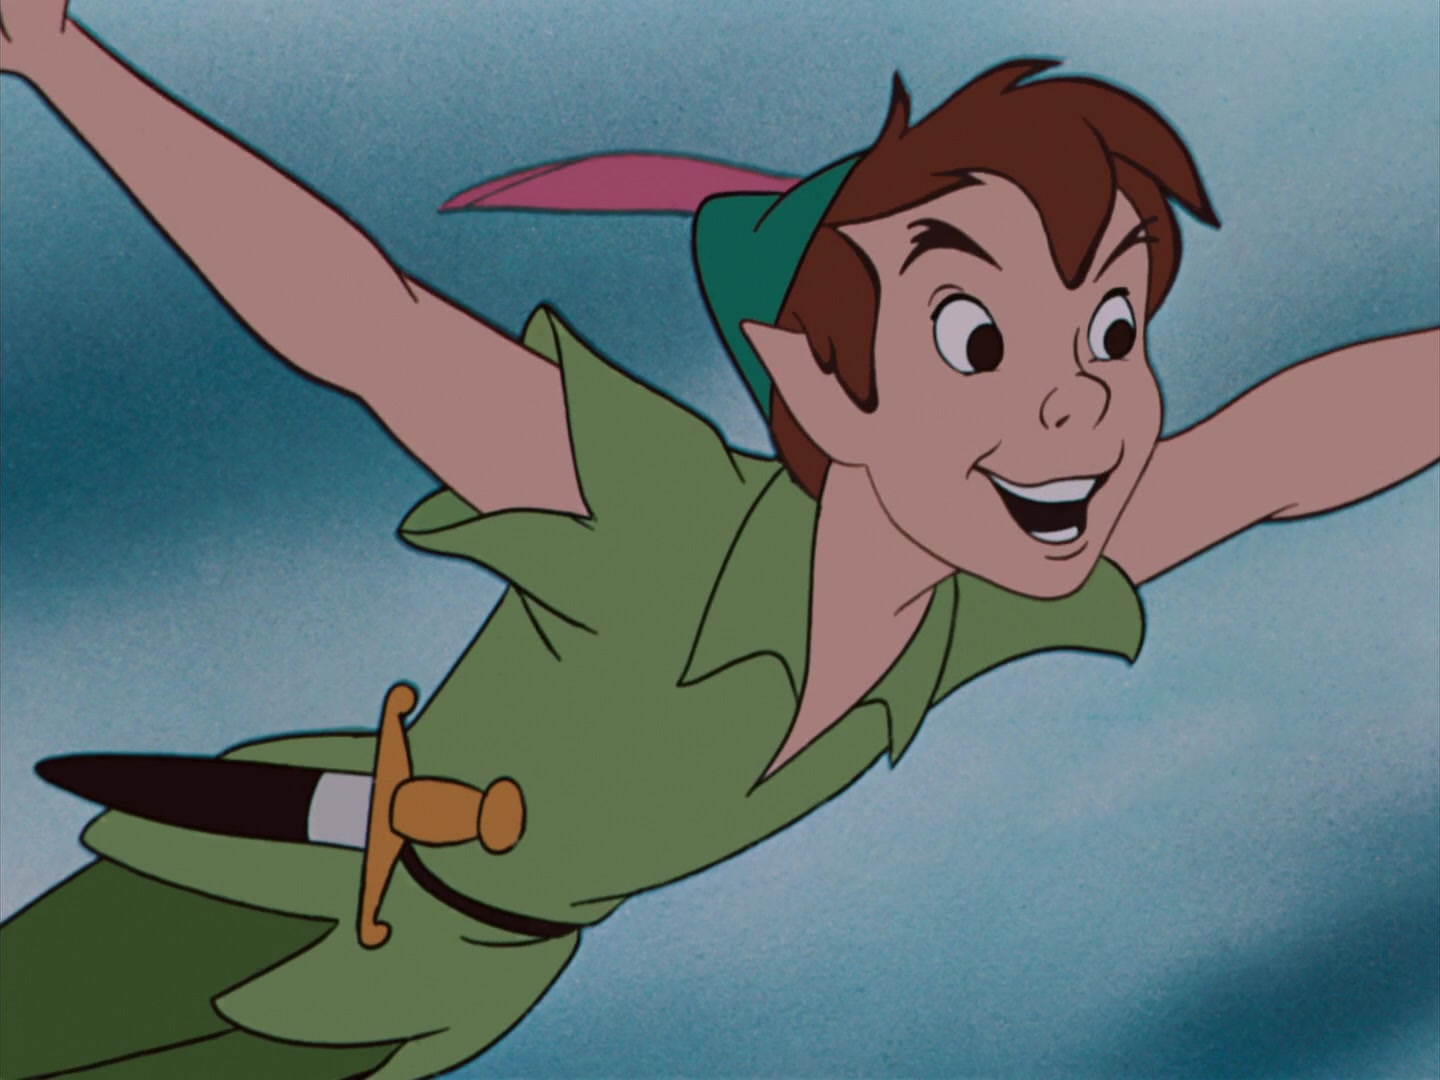 Peter Pan (Bobby Driscoll) takes to the skies above London in Peter Pan (1953), Disney